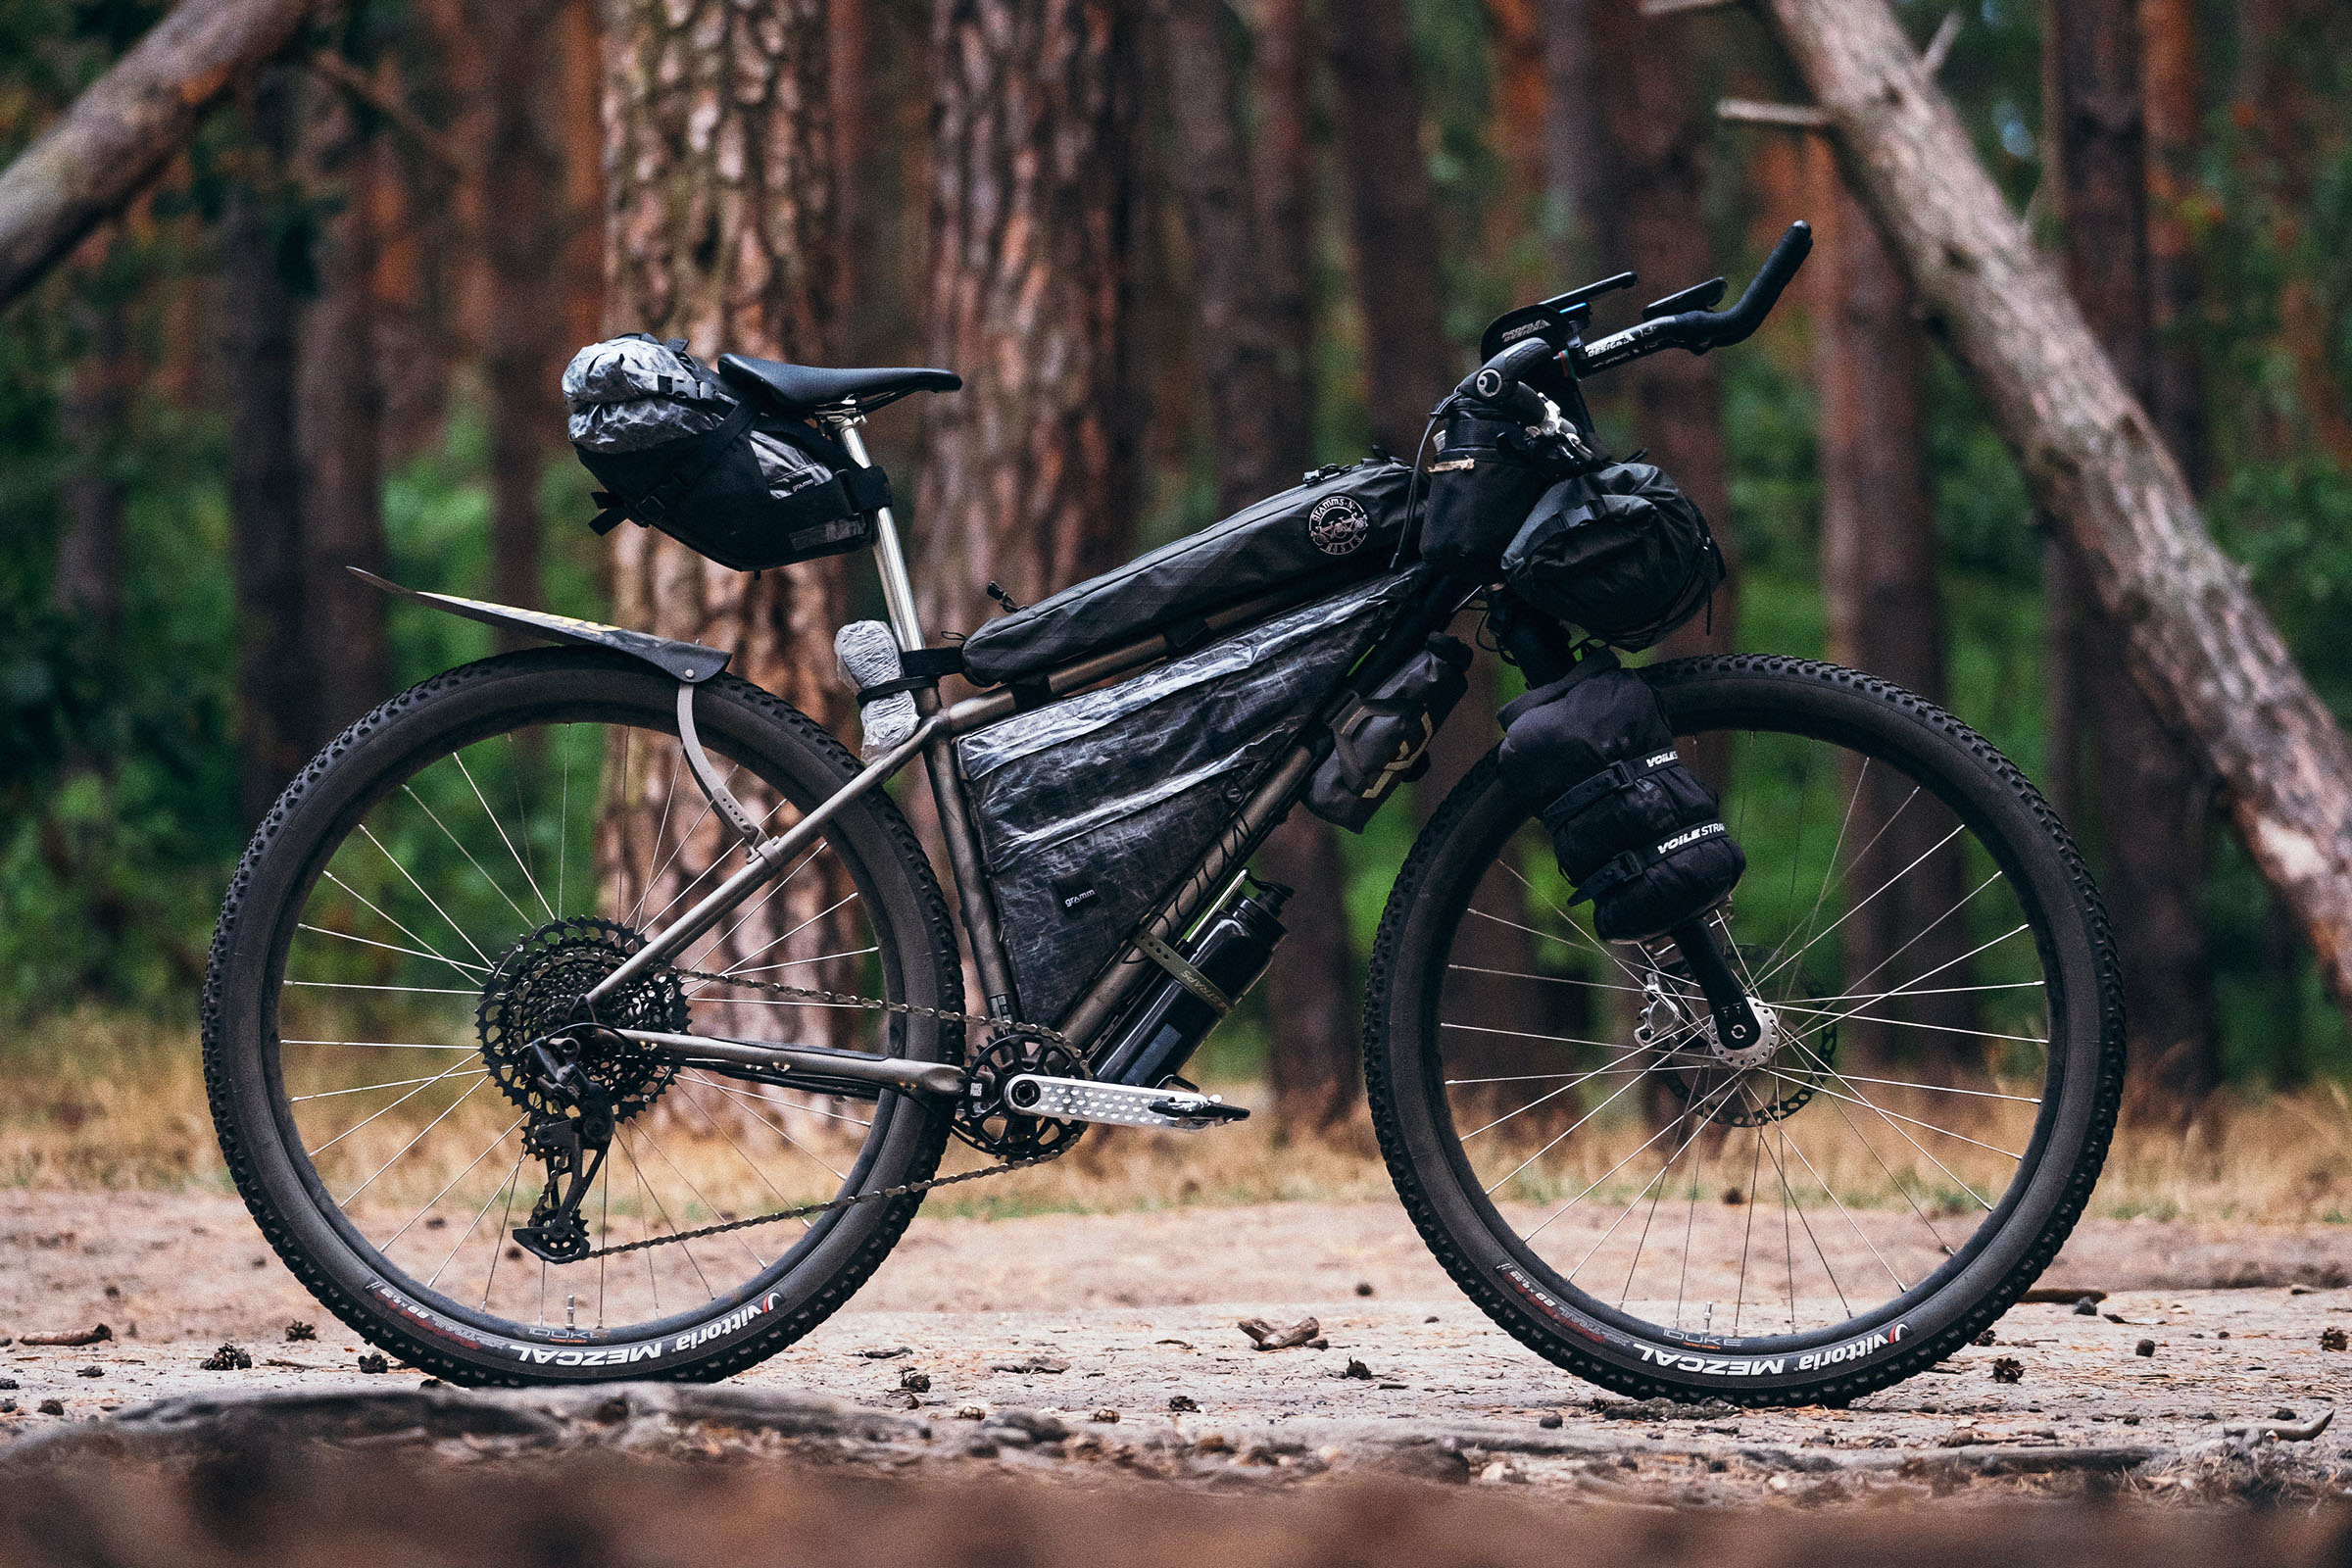 Rigs of the 2022 Silk Road Mountain Race (SRMR) - BIKEPACKING.com